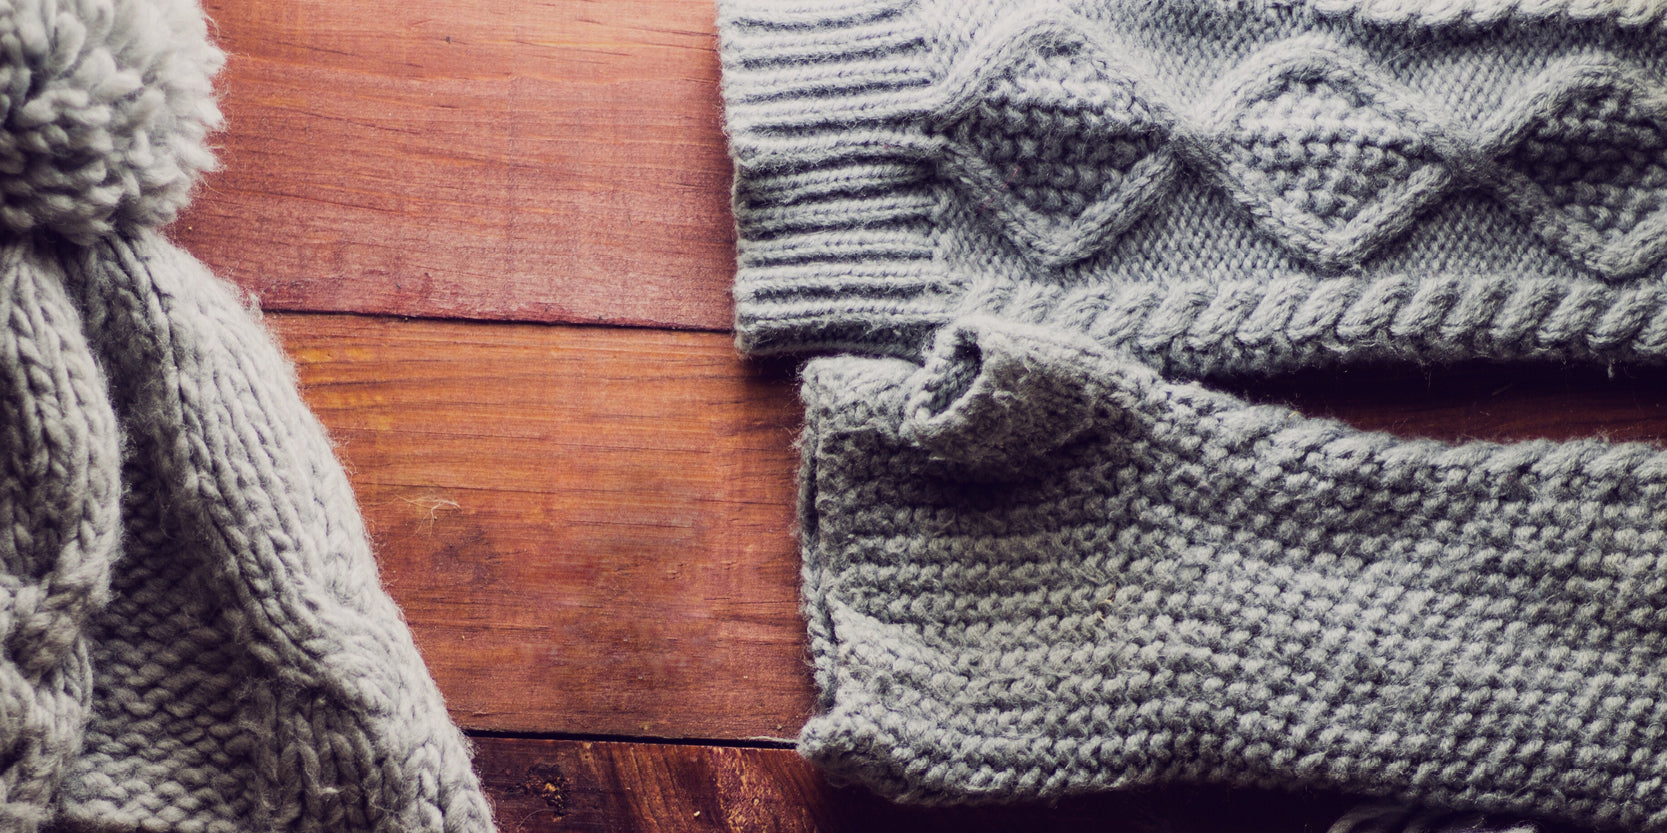 REUSE: Repurpose Old Sweaters and Jumpers - Arm bands, Mittens and Beanie